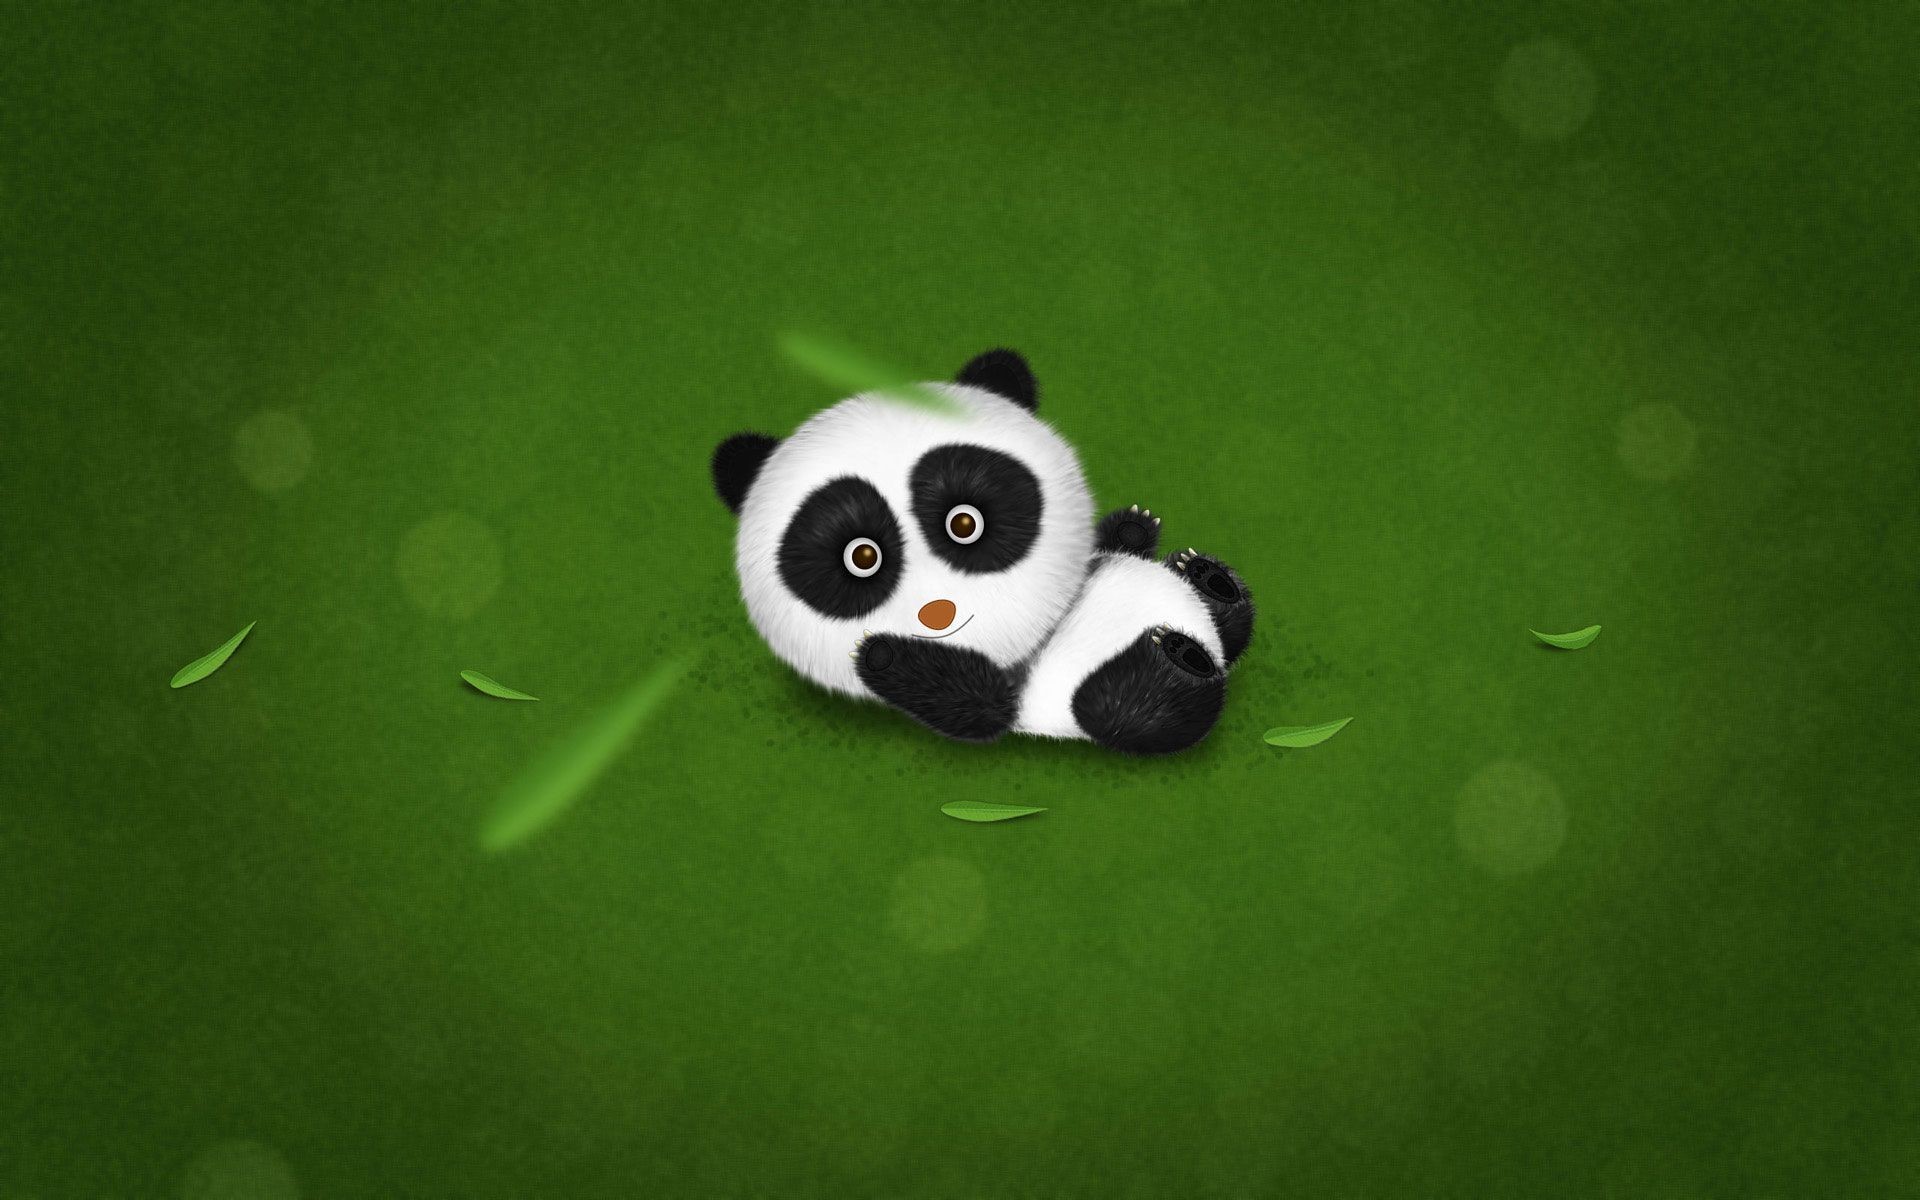 1920x1200 Cute Panda Wallpapers Android Apps on Google Play 1920Ã1200 Panda Images  Wallpapers (34